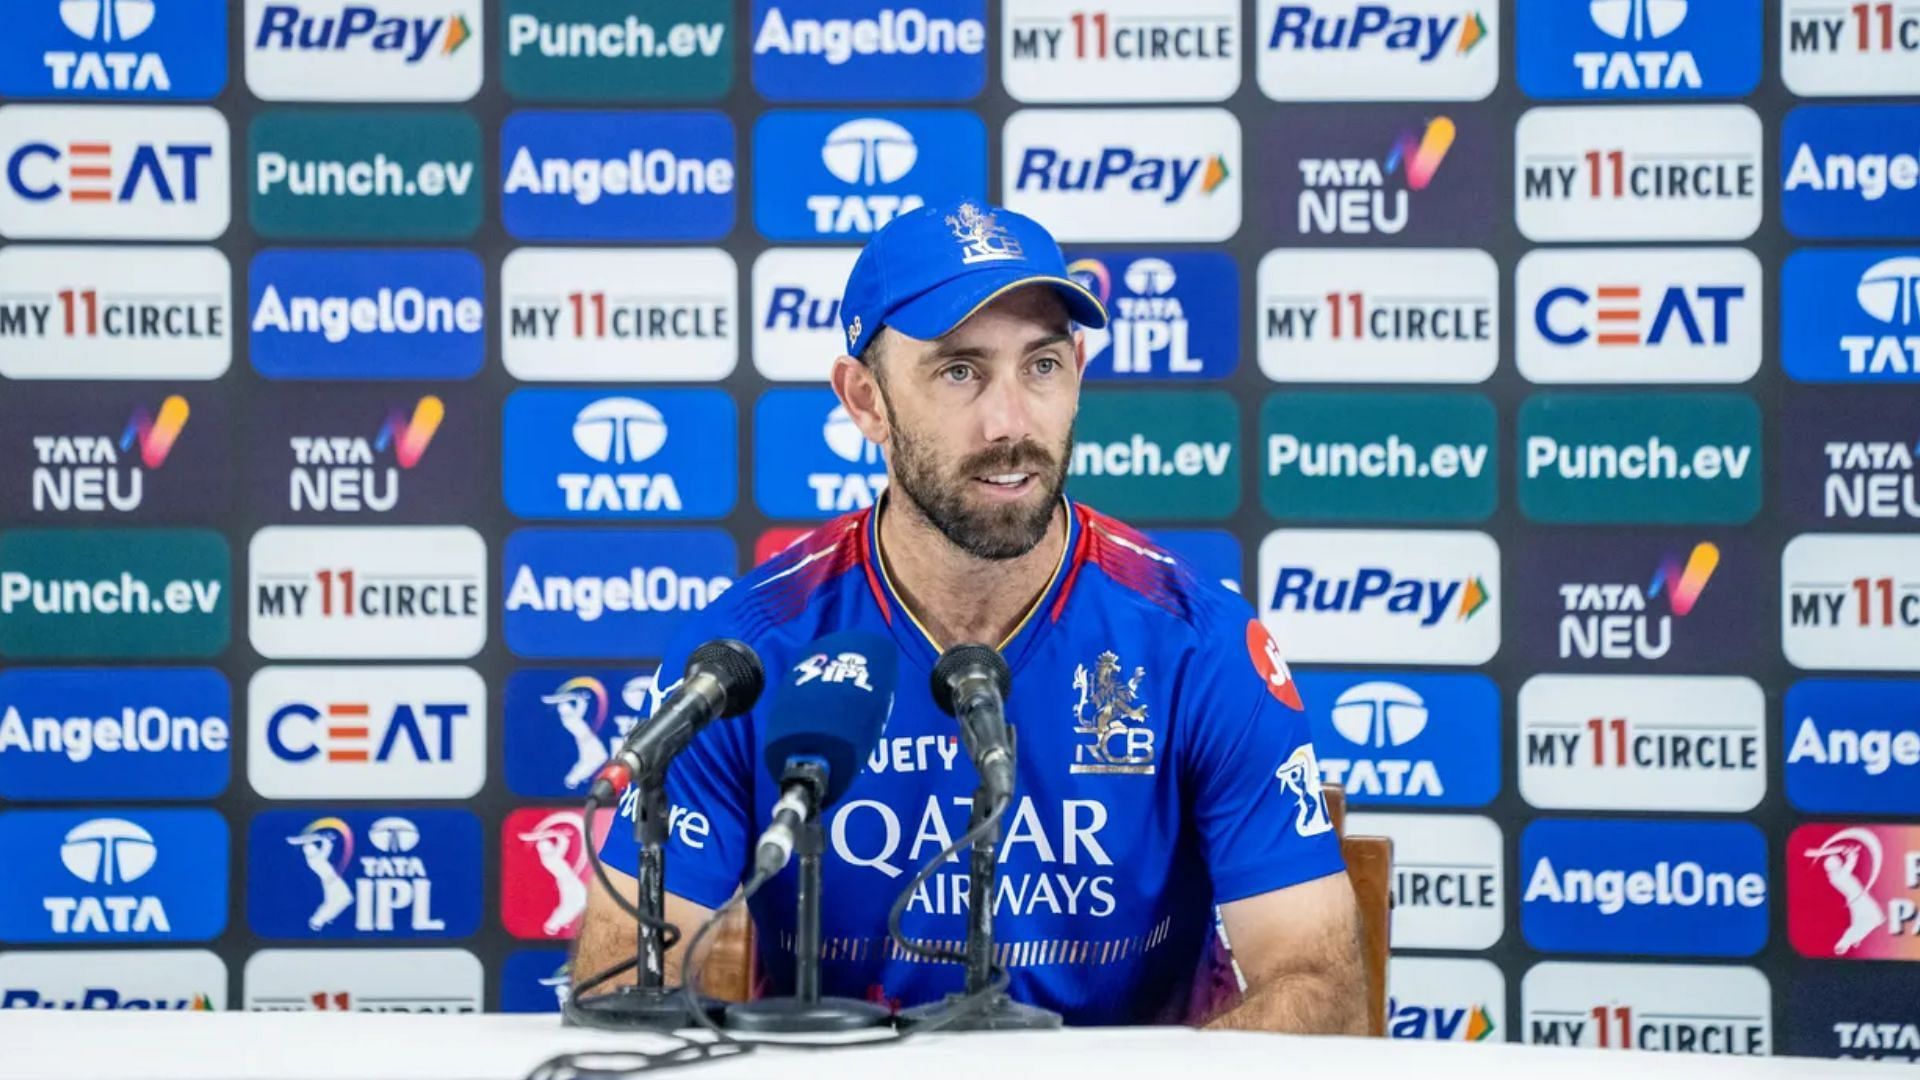 Glenn Maxwell addressed the press on Monday about him looking after his mental and physical health